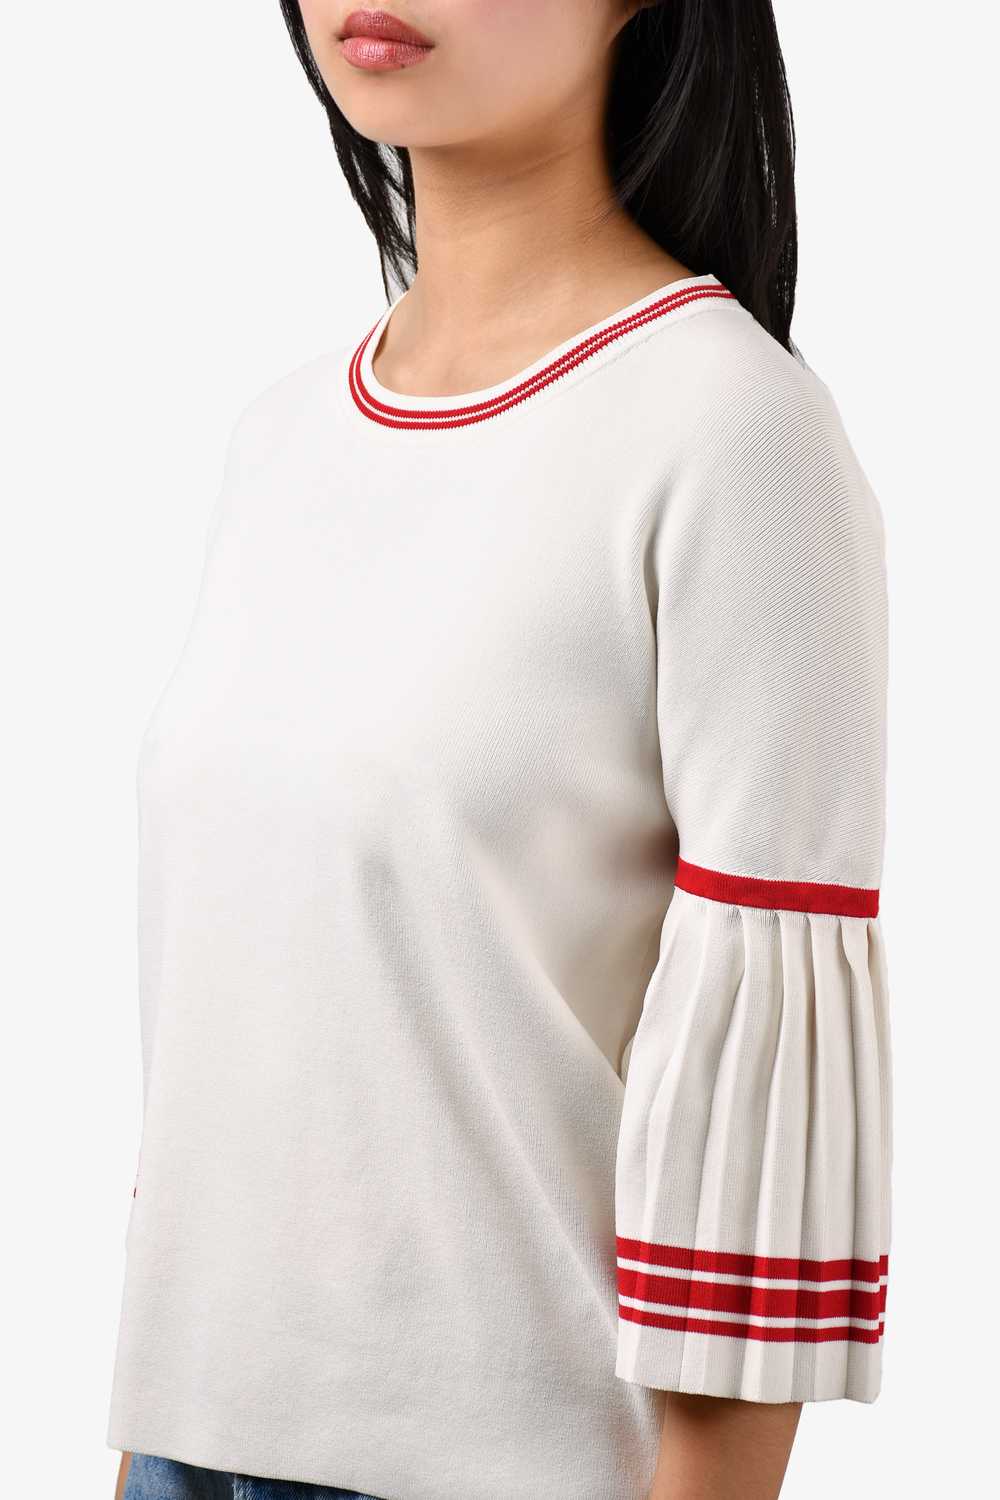 Maje White and Red Knit Pleated Sleeve Top Size 1 - image 4